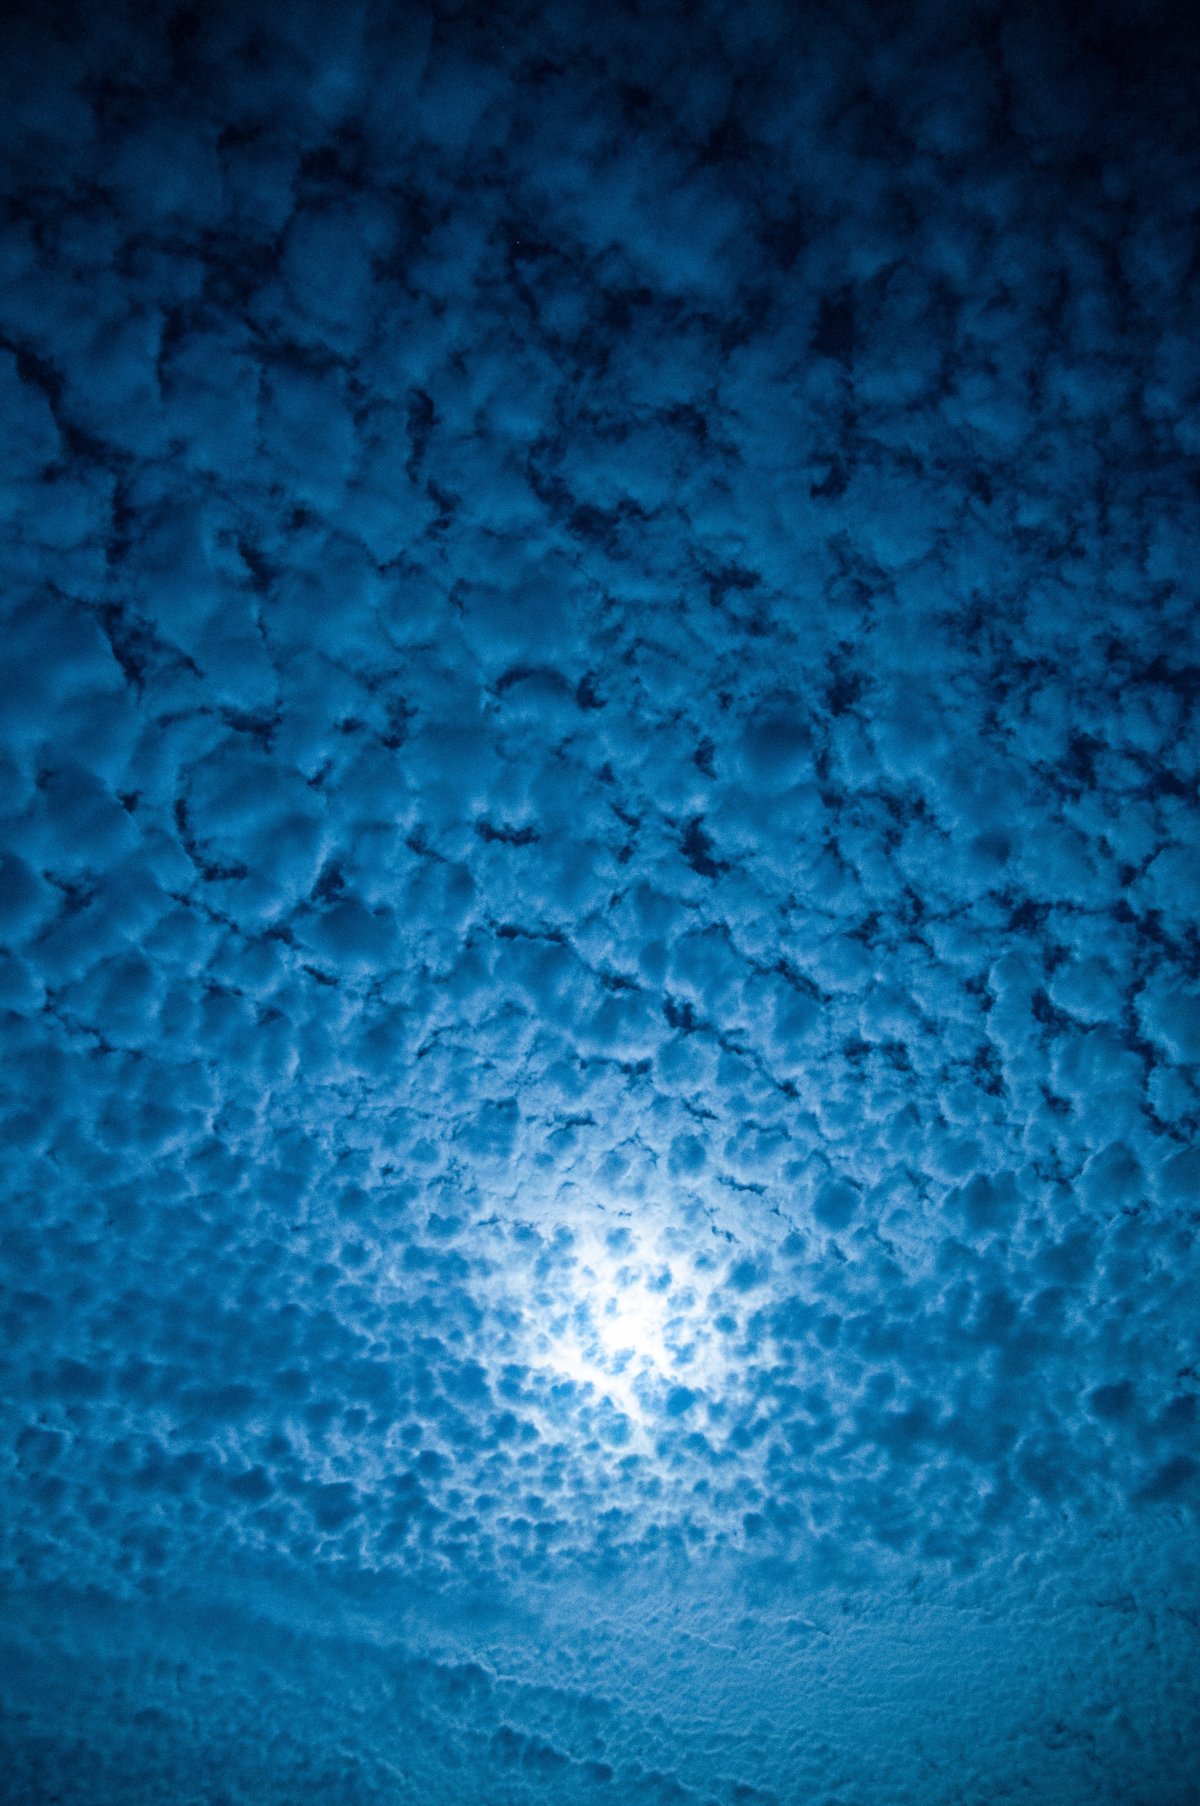 Moon night cotton cloud picture